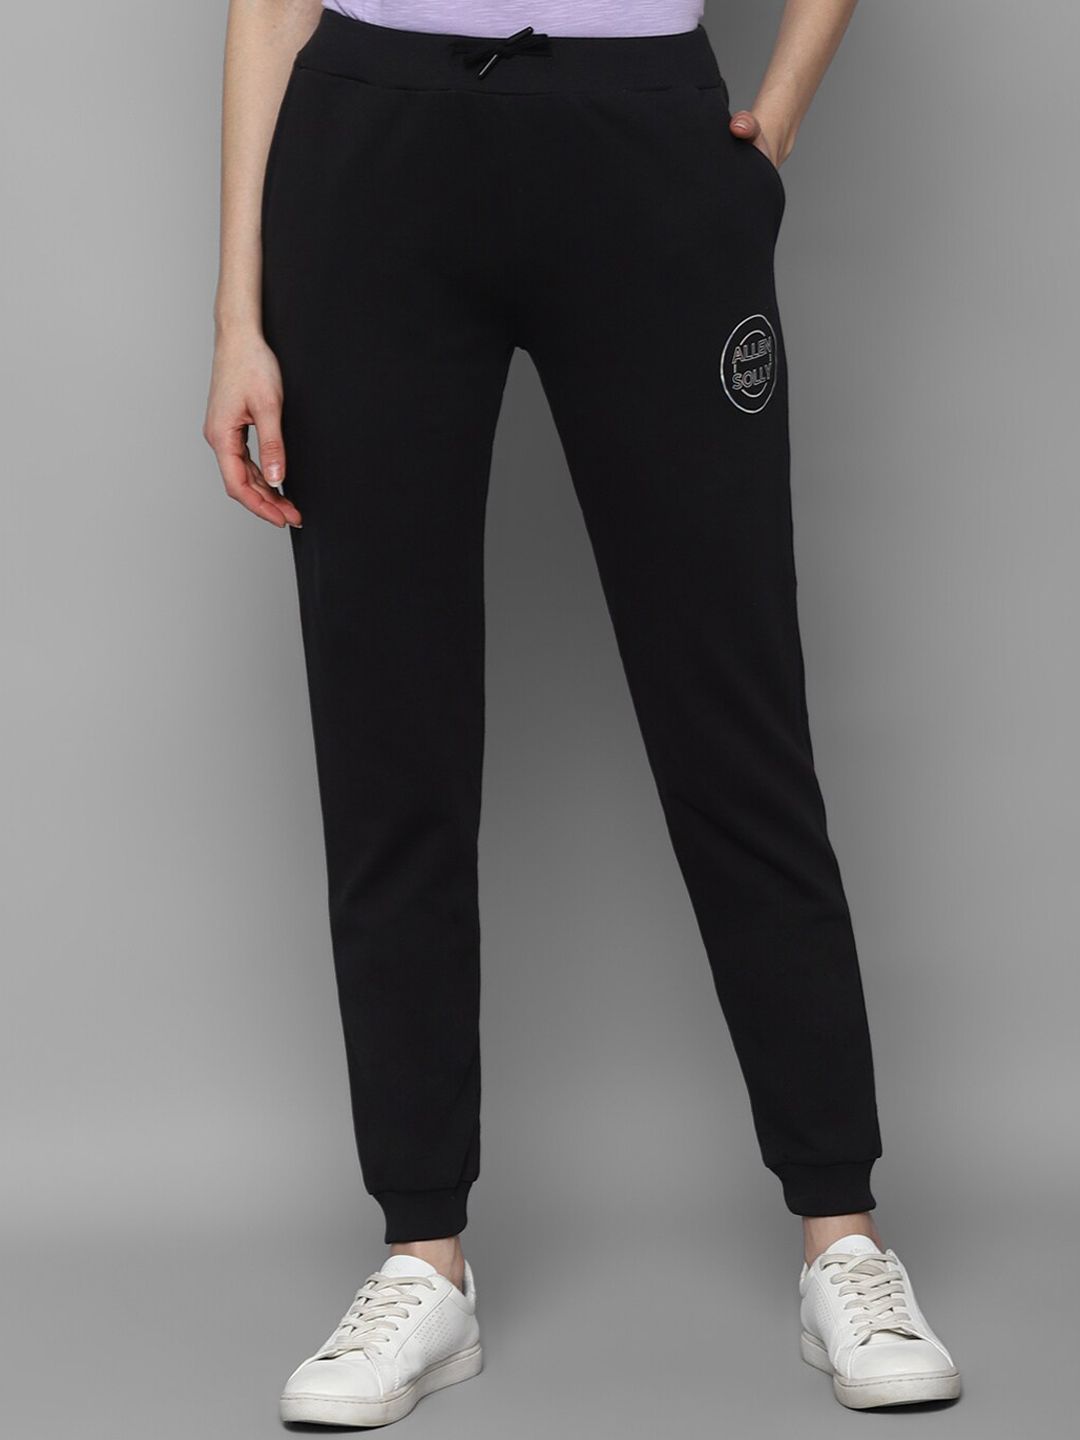 Allen Solly Woman Women Black Joggers Trousers Price in India